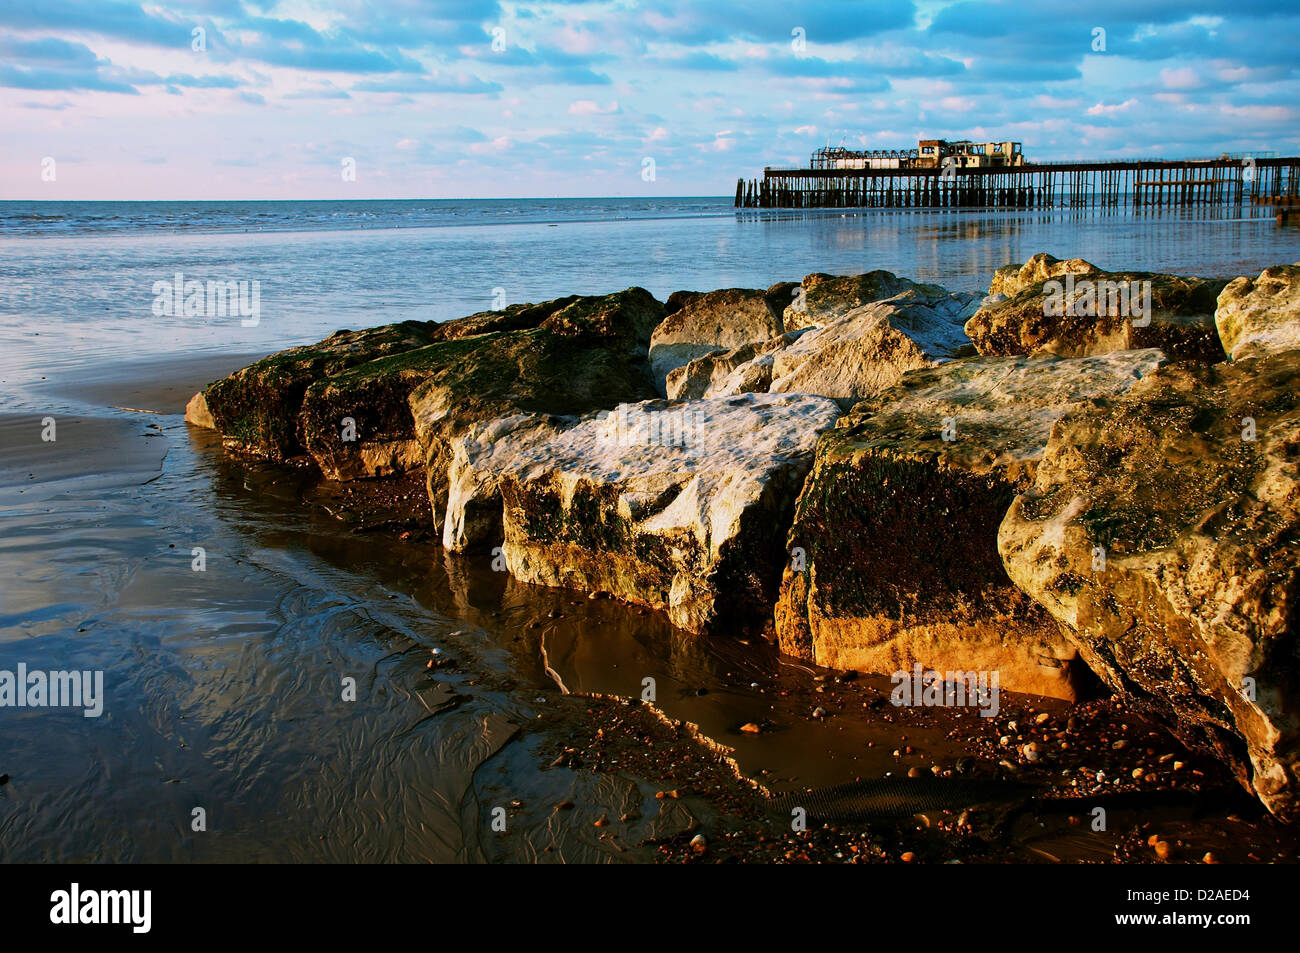 hastings seafront in january at sunrise showing the pier and beach rocks Stock Photo